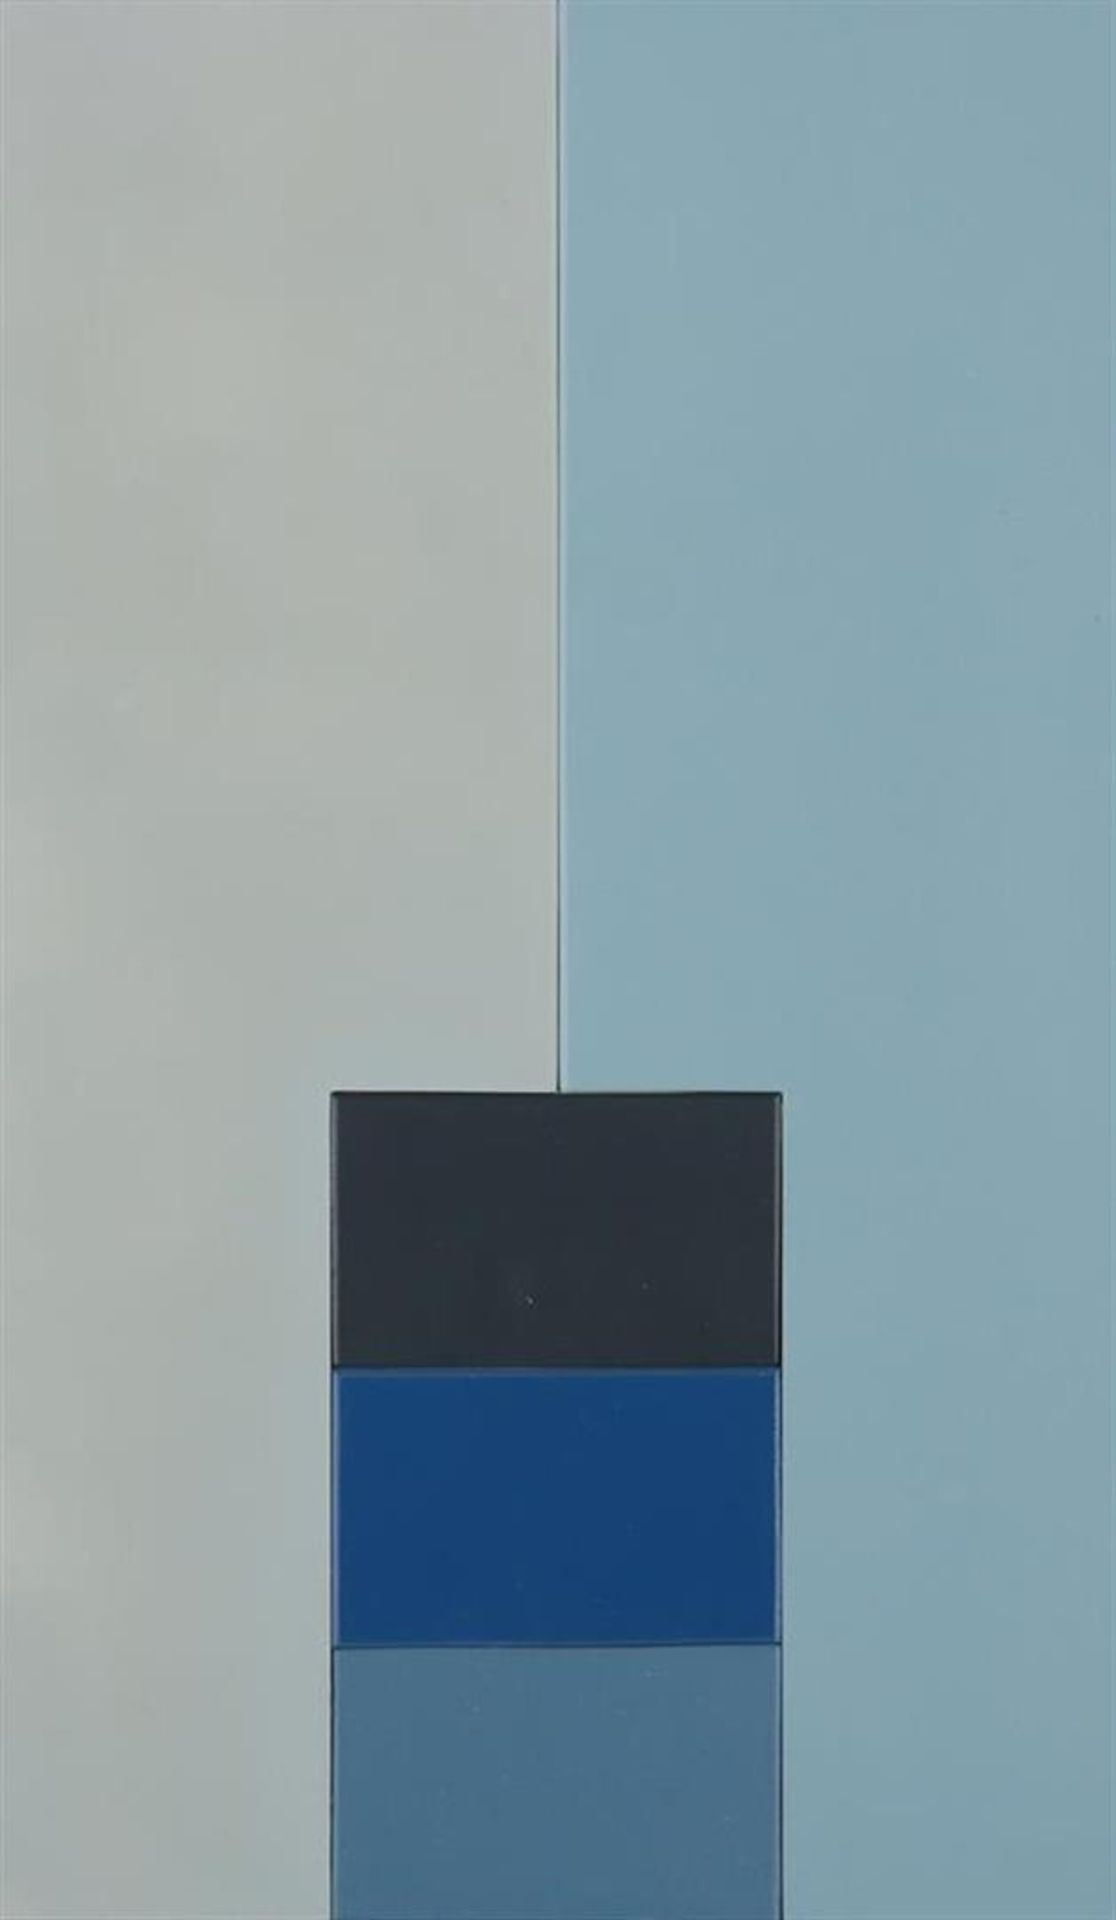 Antonia Lambele (1943-) Aidyl, acrylic on steel, signed and dated 1998 on the reverse, acrylic on